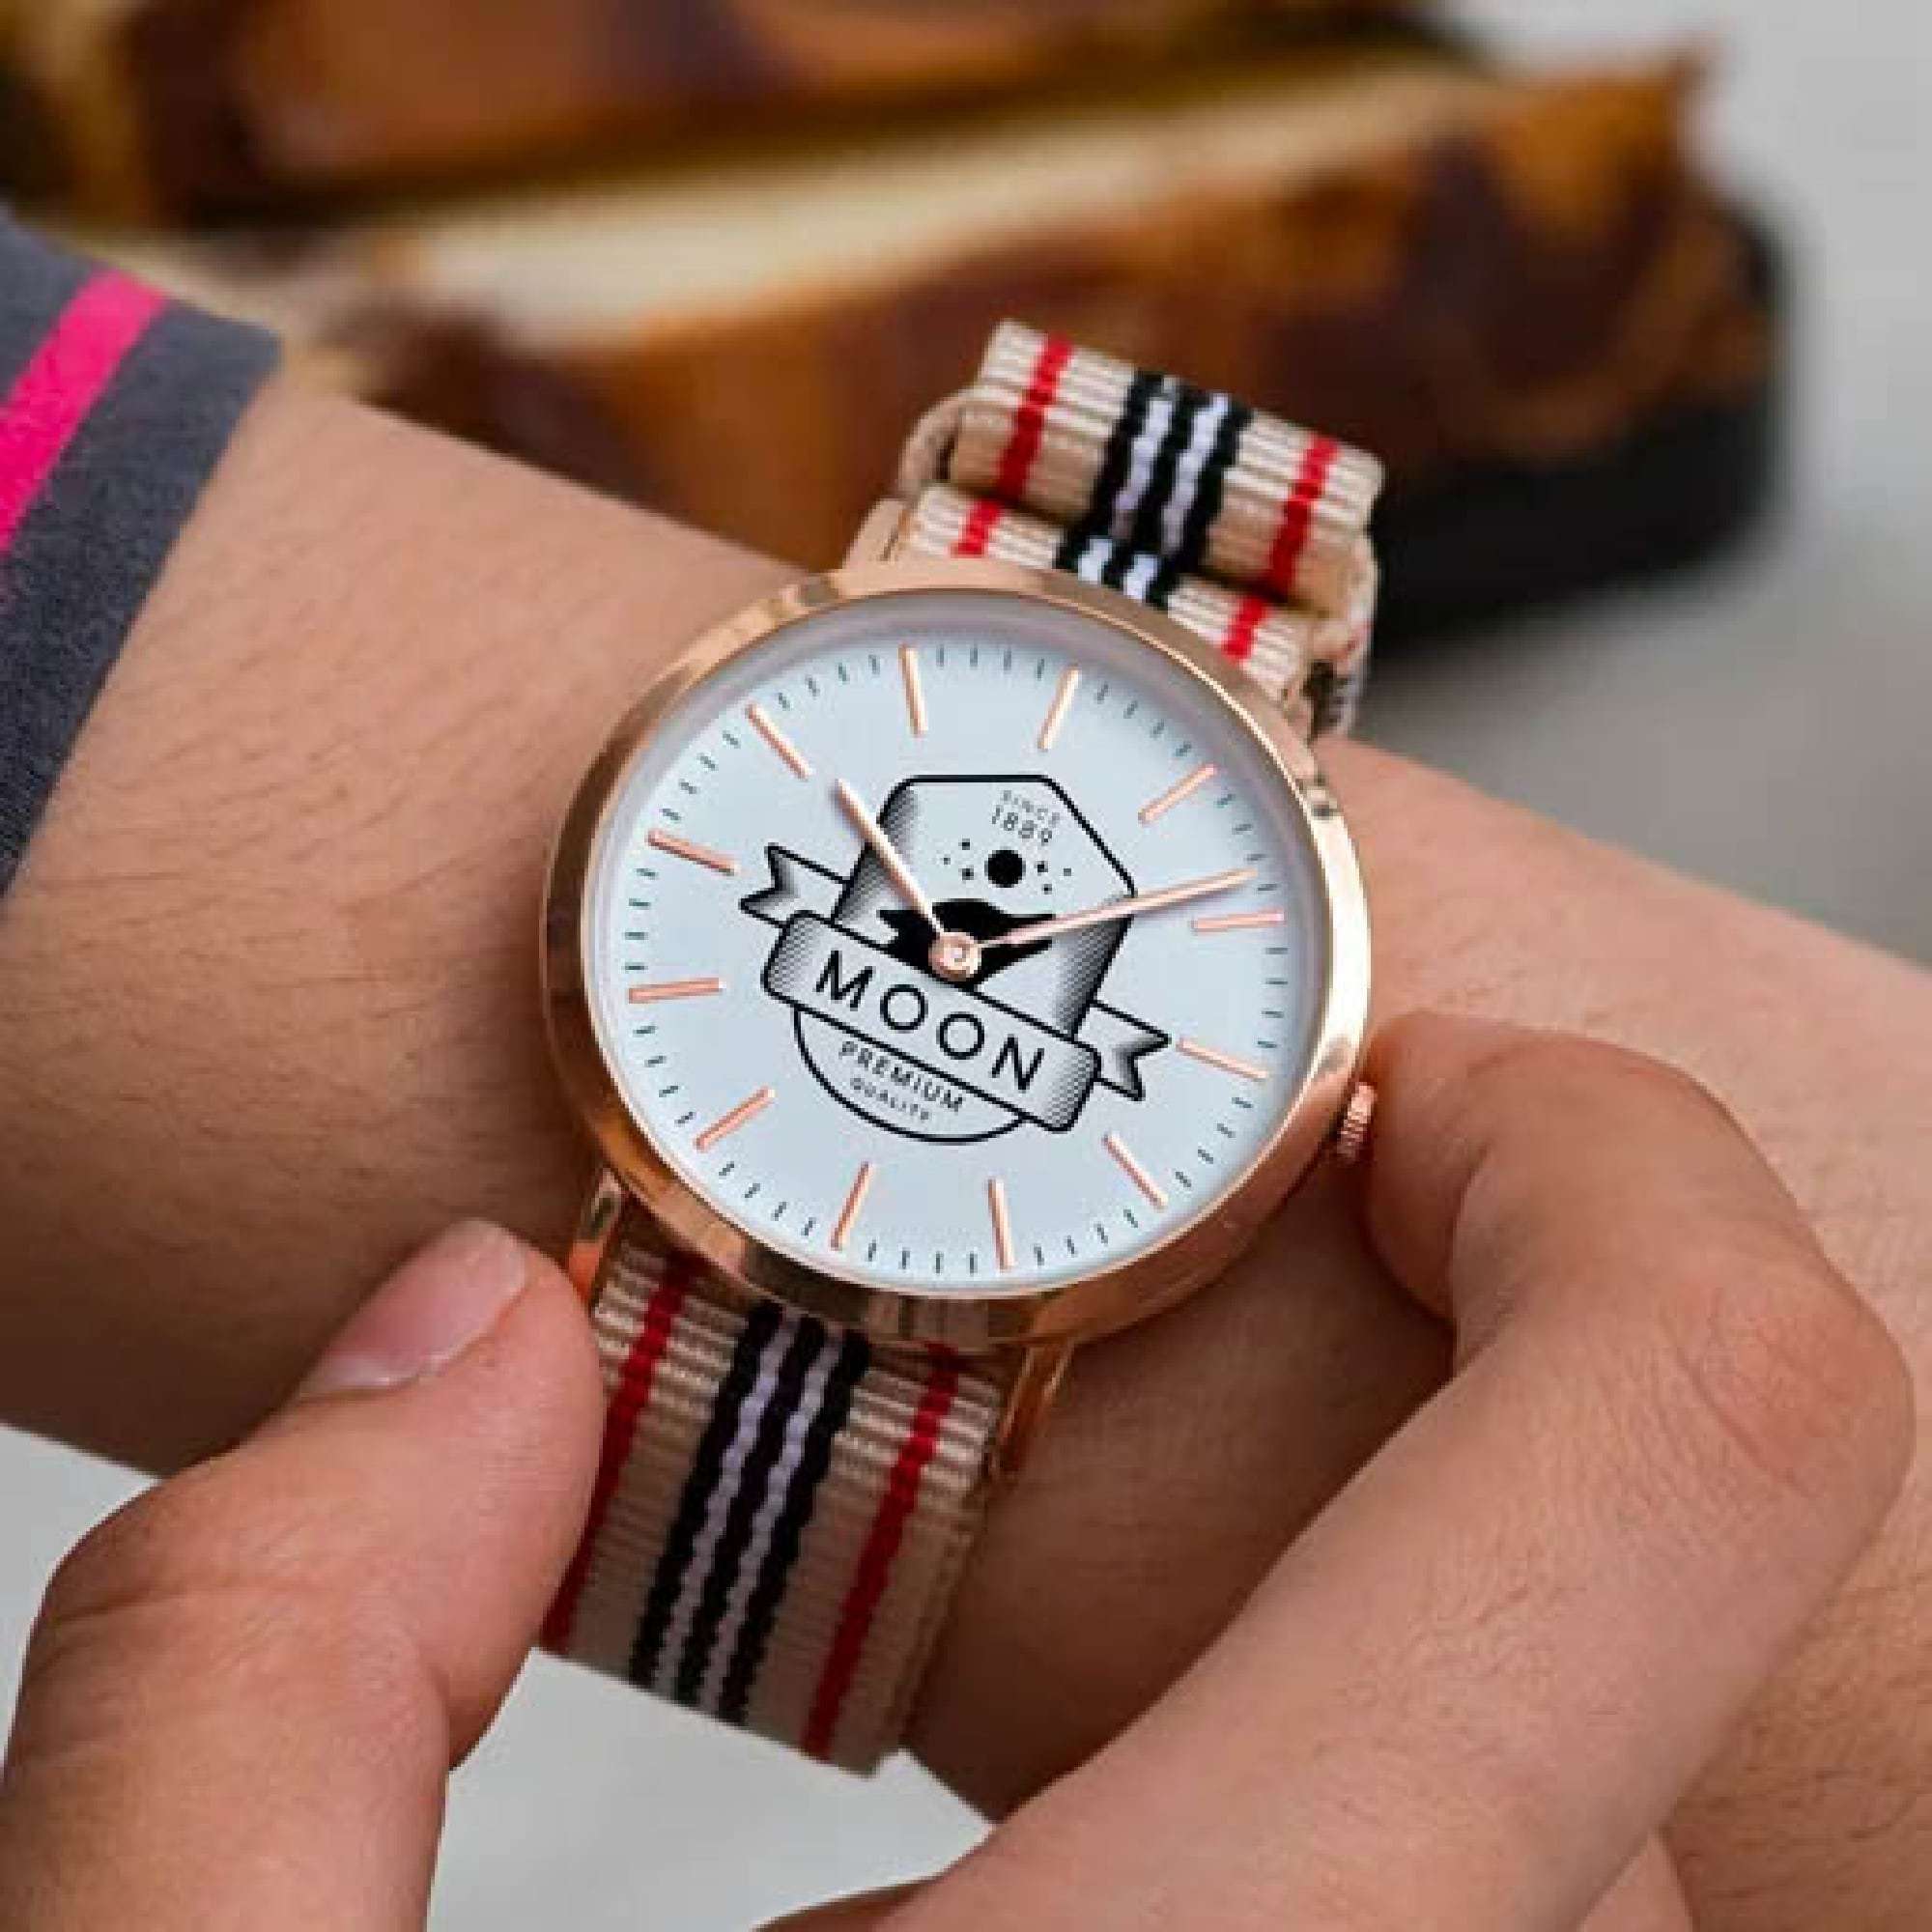 Blind vertrouwen Opgetild thuis Create a Watch in 4 Easy Steps | Design a Watch in 15 Minutes!